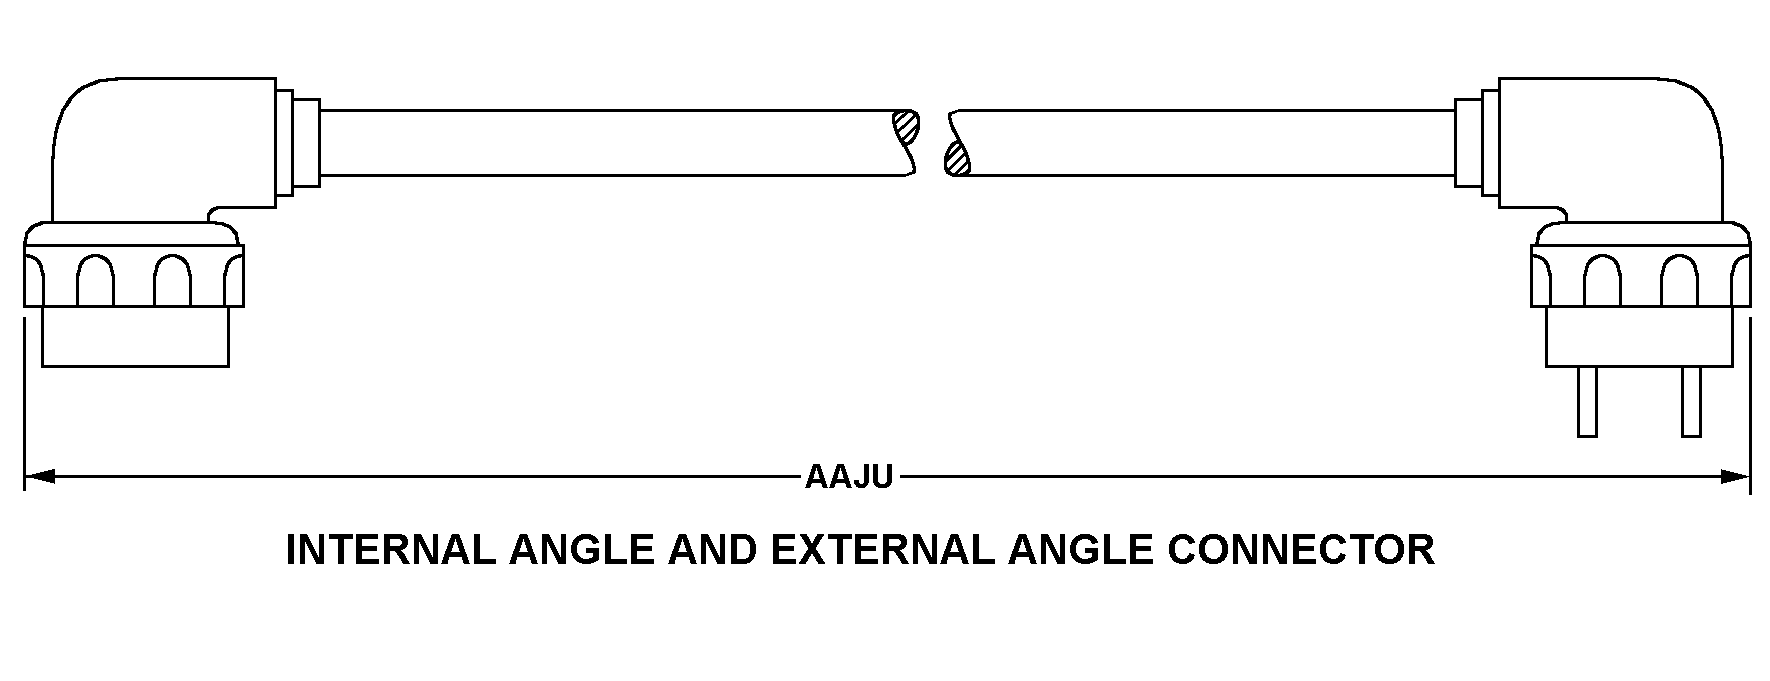 INTERNAL ANGLE AND EXTERNAL ANGLE CONNECTOR style nsn 5995-01-242-3641